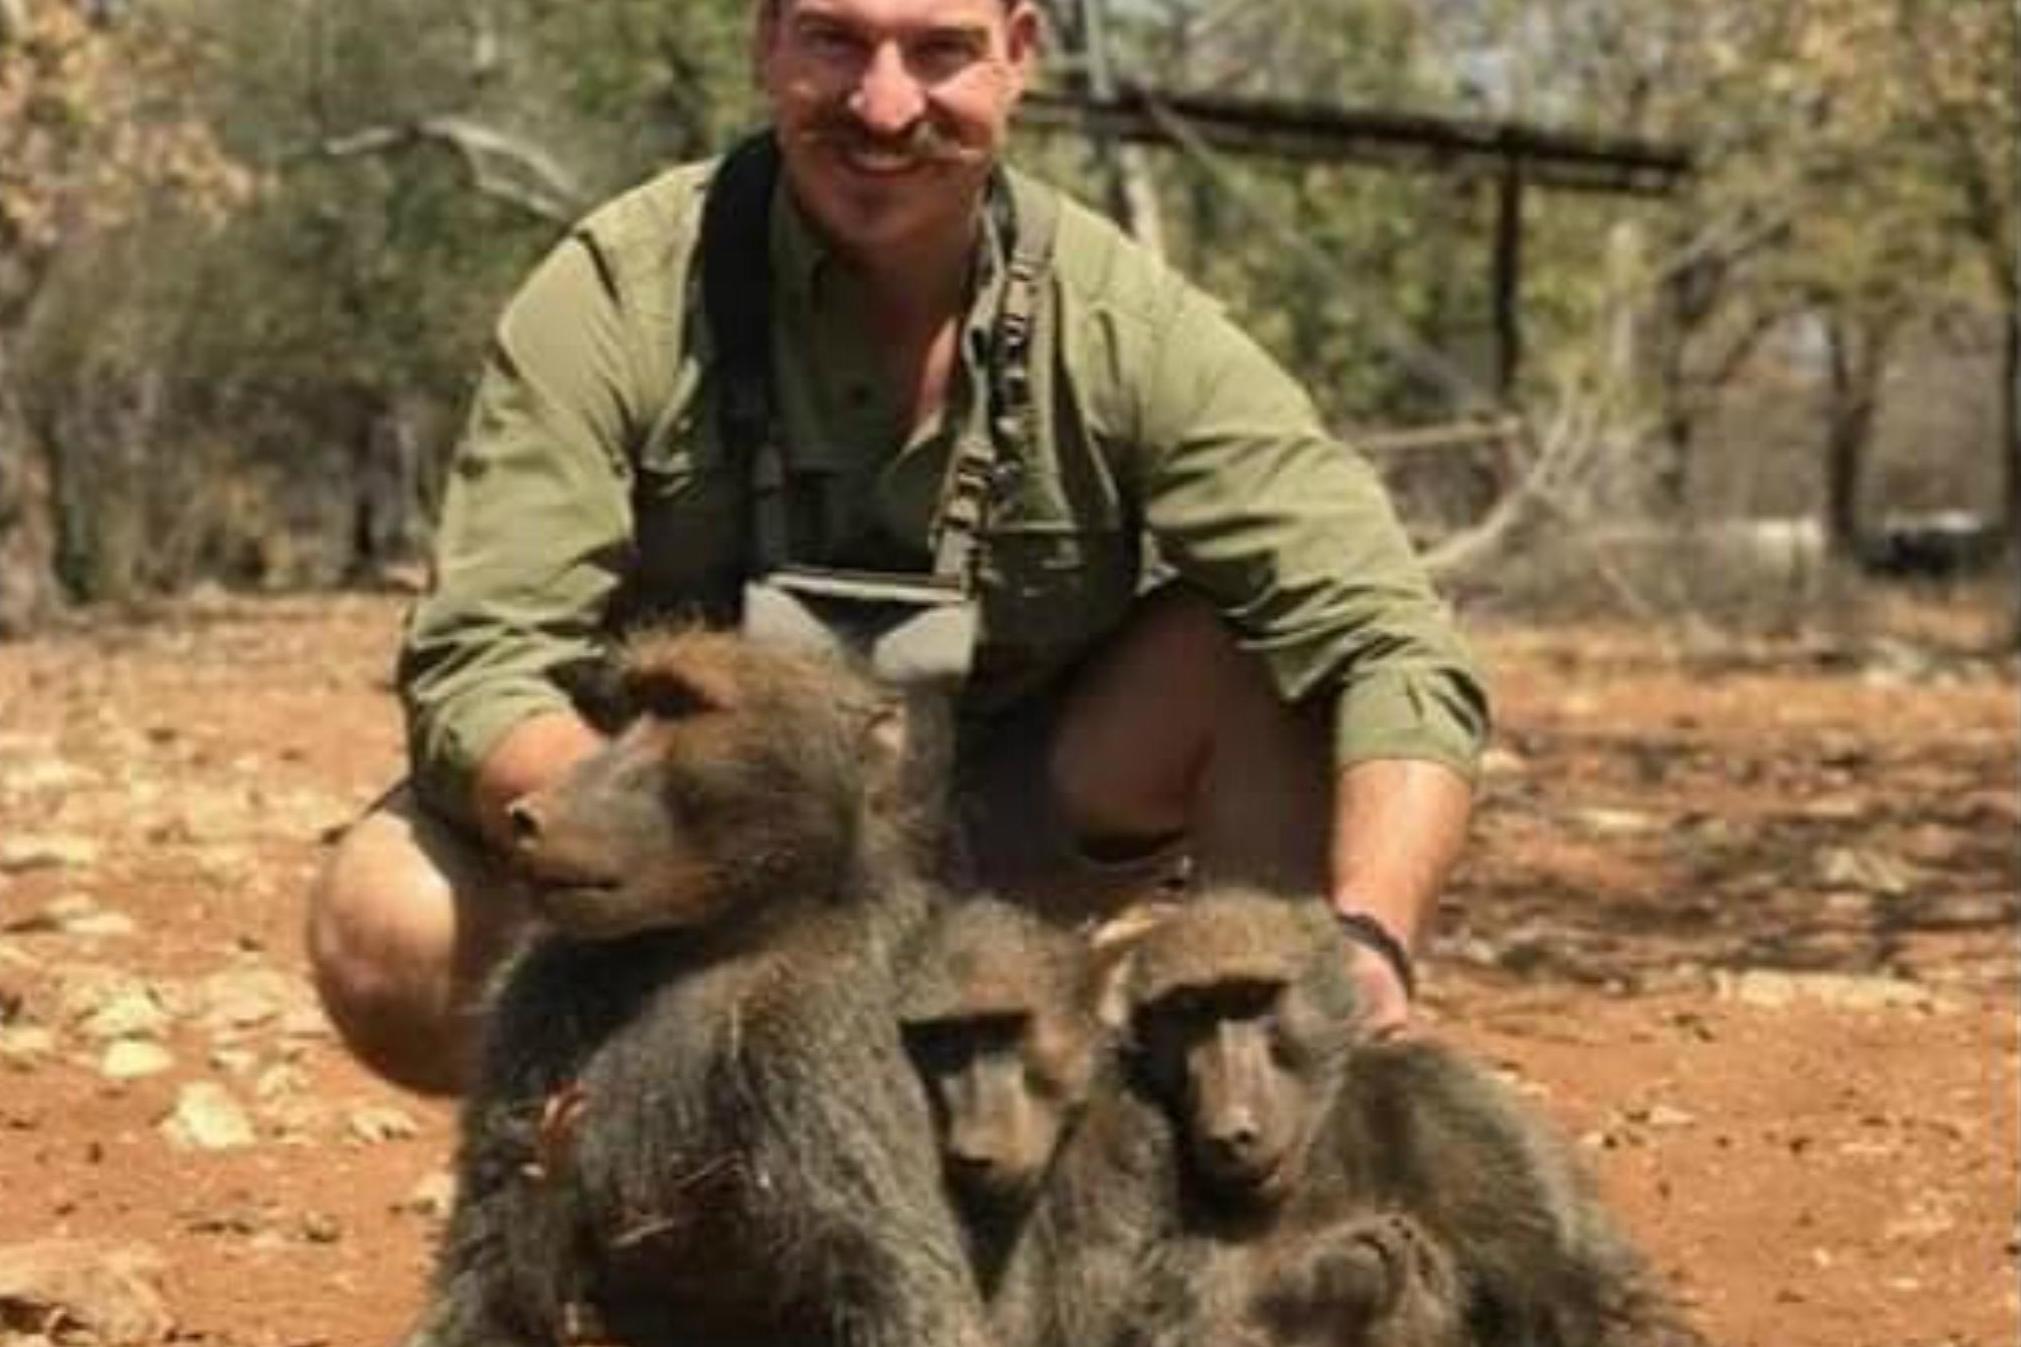 Blake Fischer, an Idaho Fish and Game Commissioner, has been called on to resign after posing for a picture with the family of baboons he killed.